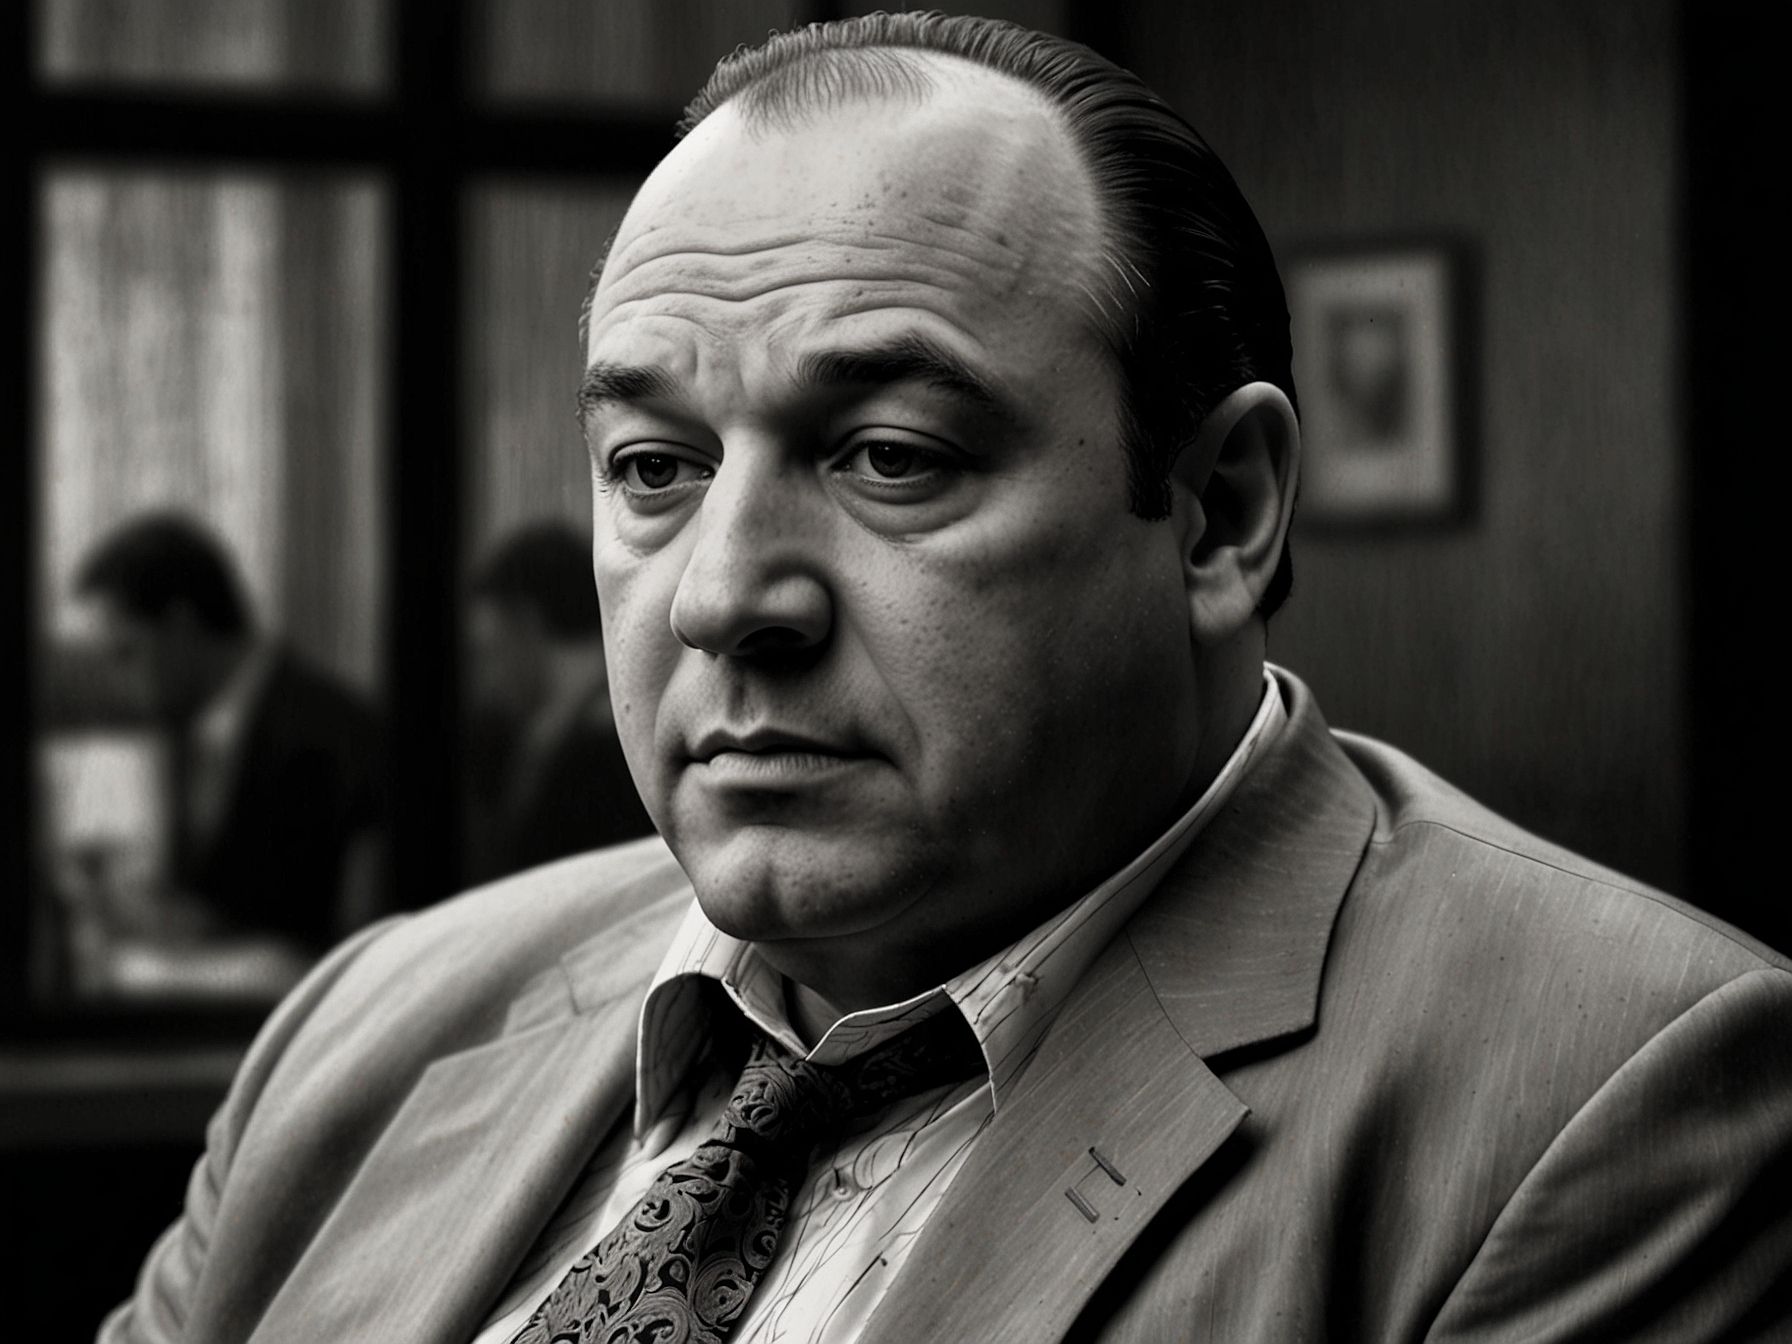 Image of Tony Soprano, played by James Gandolfini, in his iconic mob boss role. The scene captures his complex character, embodying both his criminal activities and personal struggles.